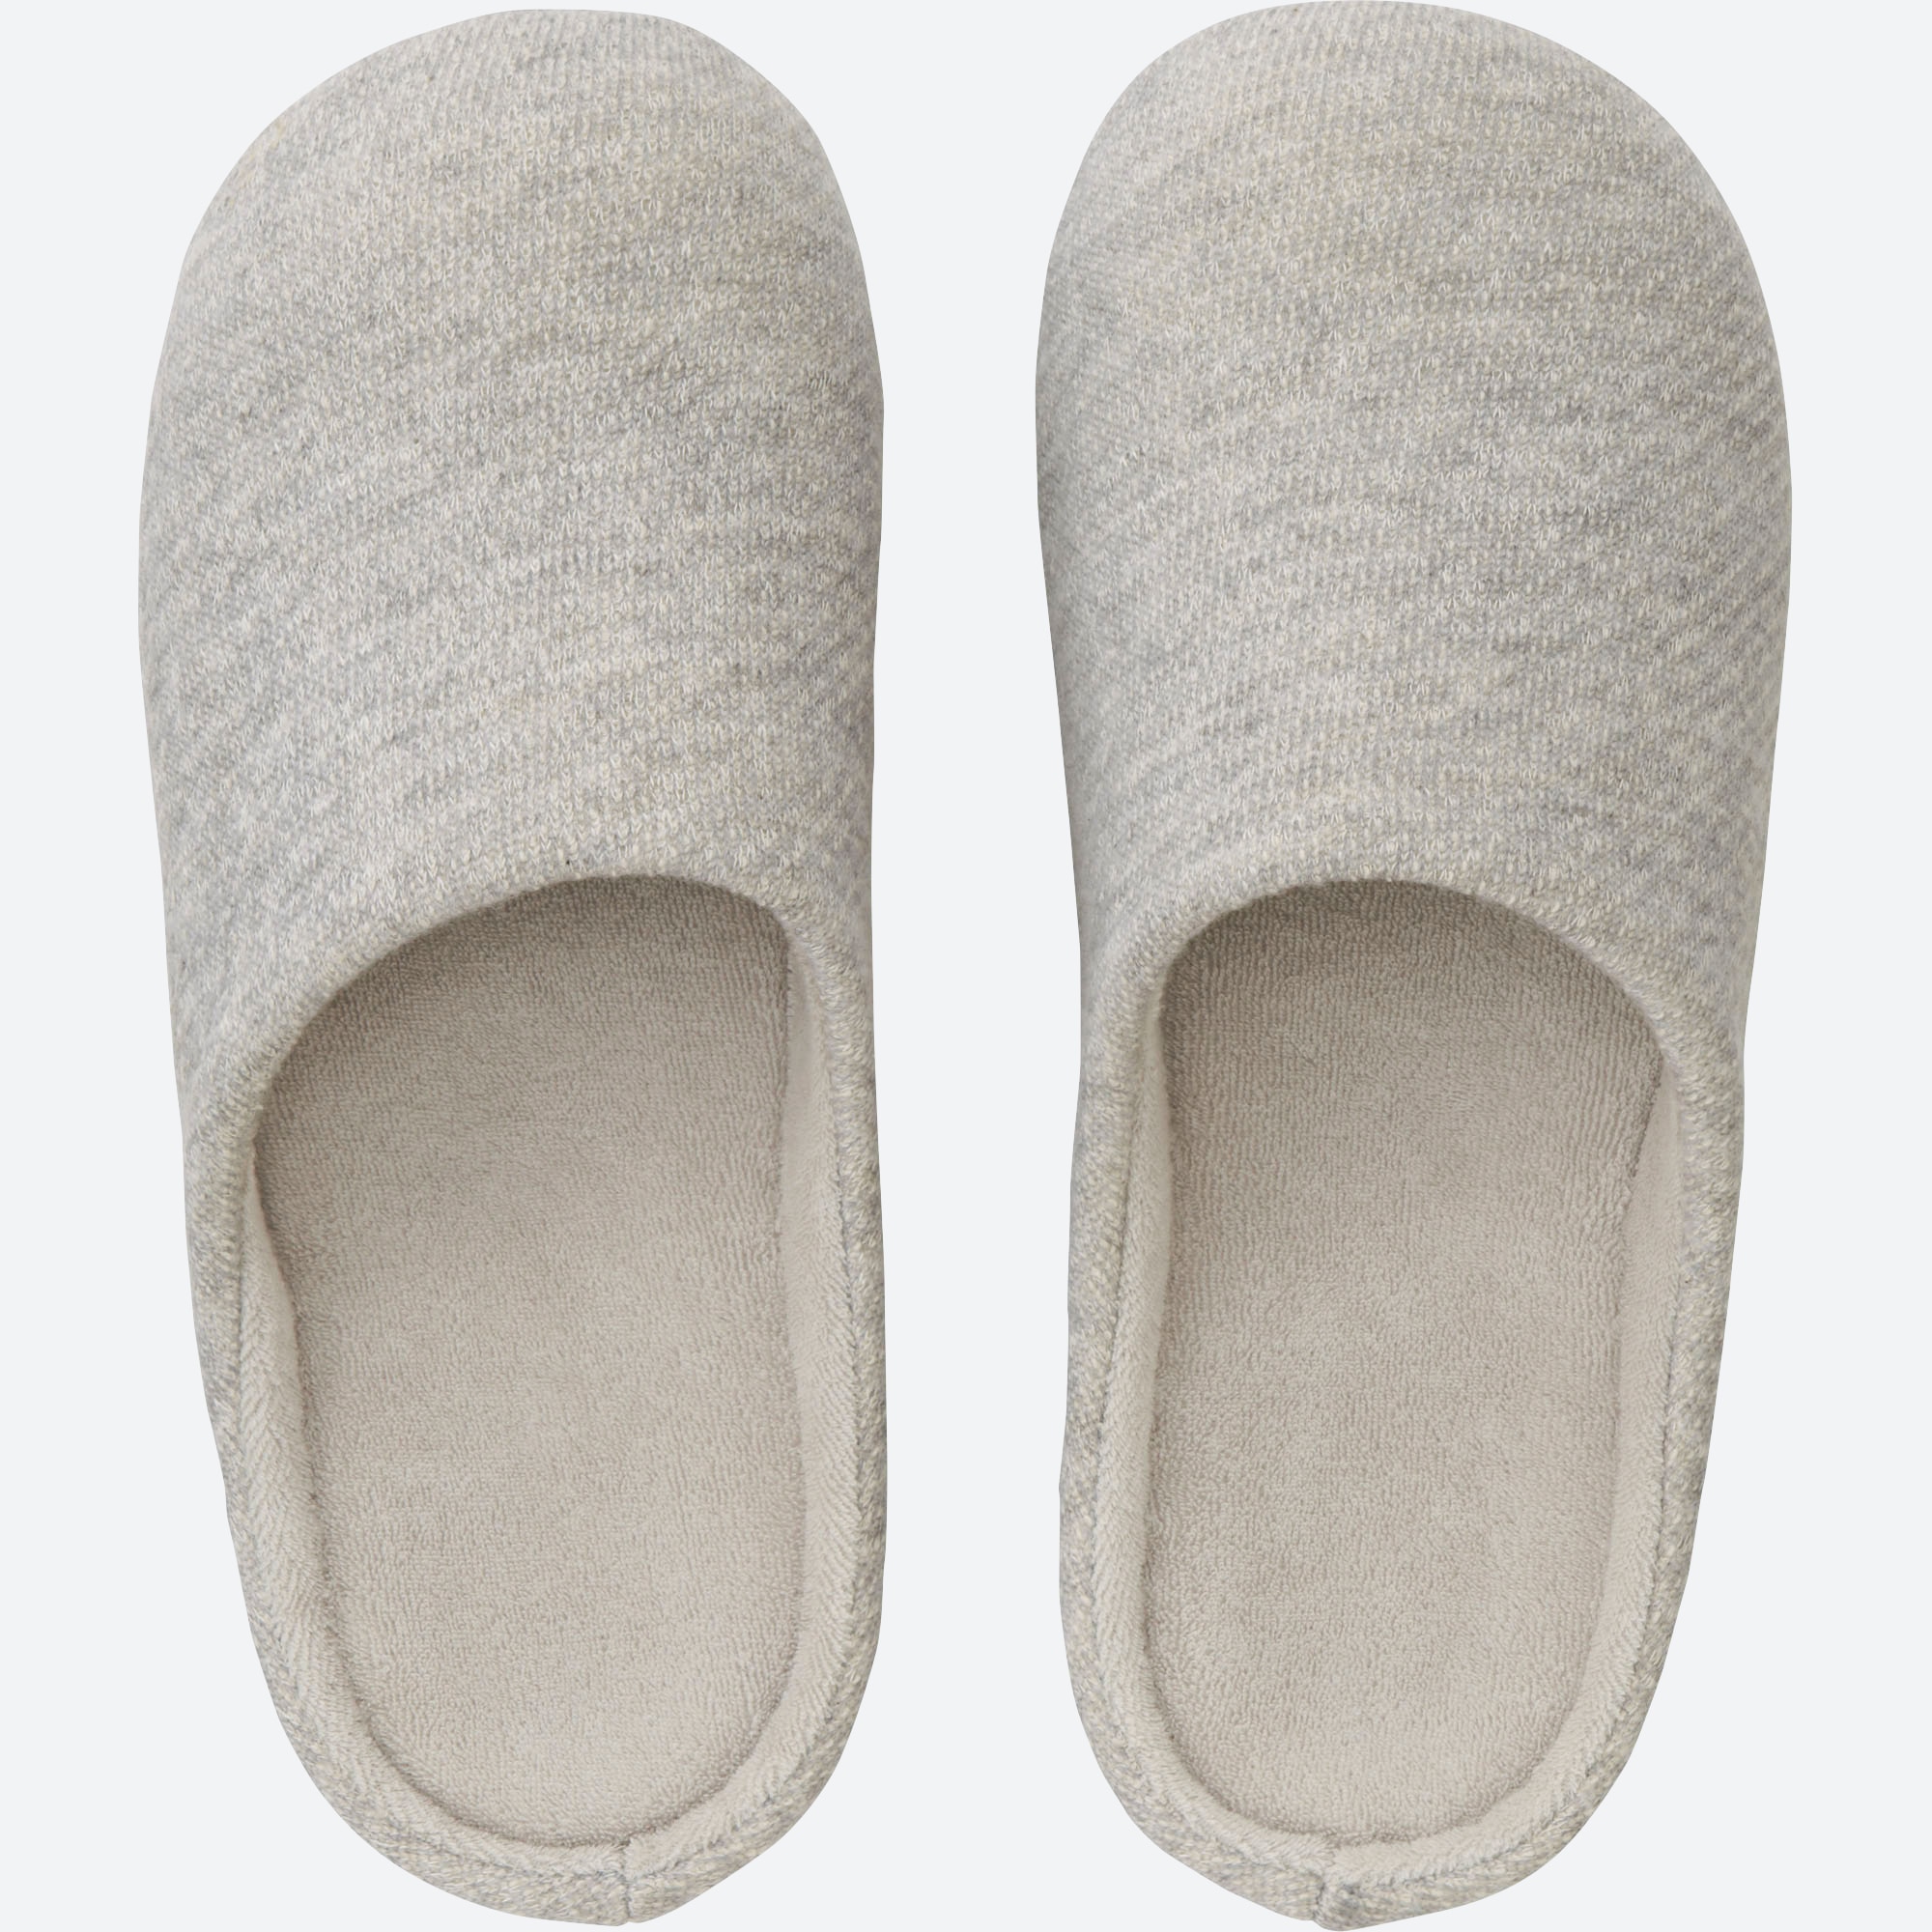 uniqlo house slippers